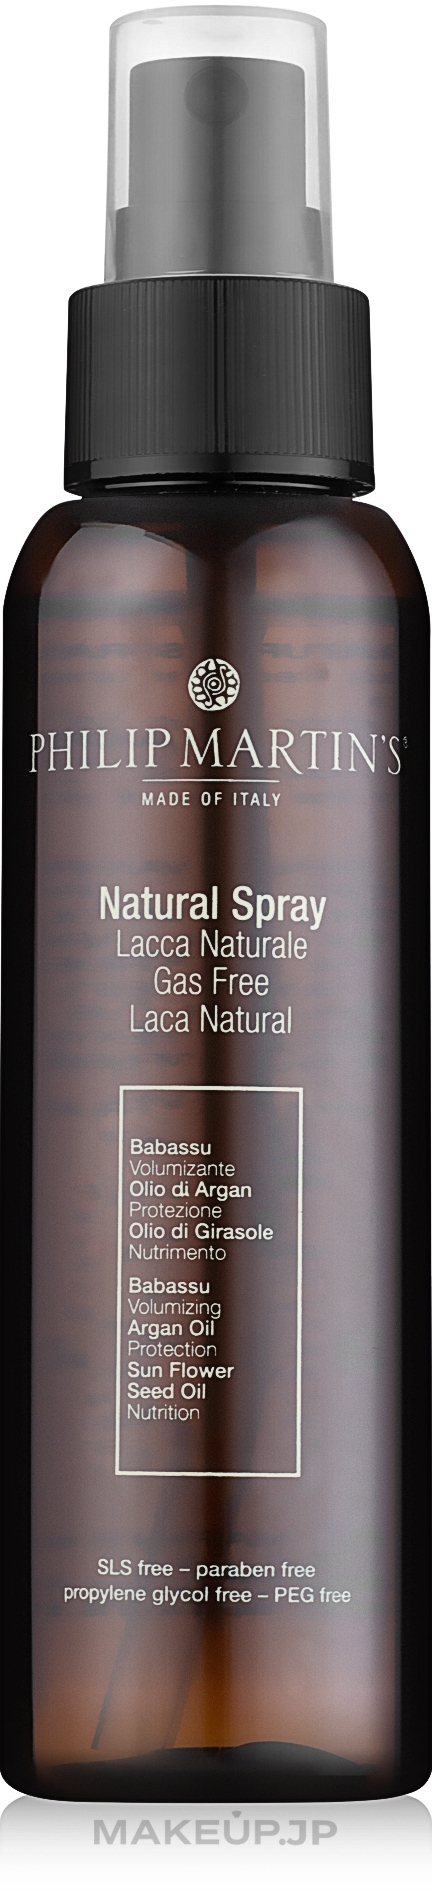 Natural Styling Spray - Philip Martin's Natural Styling Spray — photo 250 ml